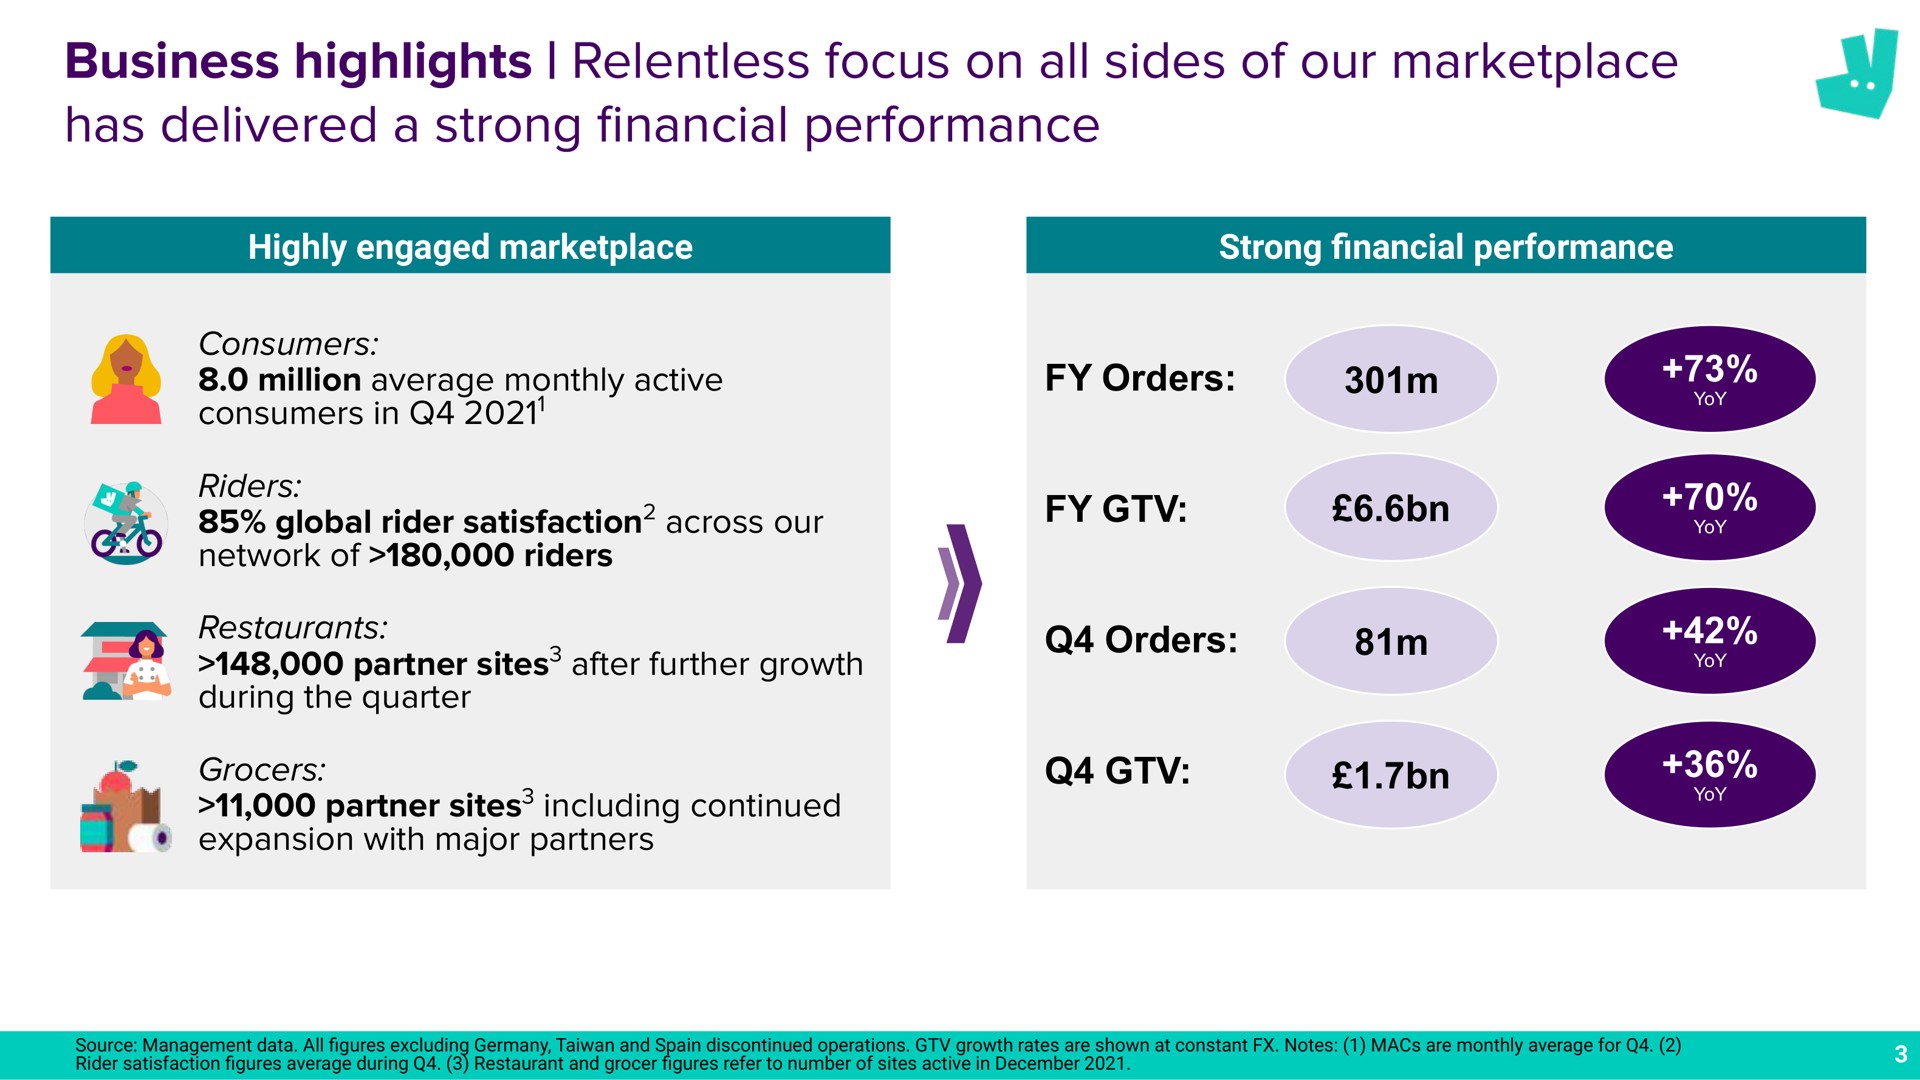 business highlights relentless focus on all sides of our has delivered a strong performance financial | Deliveroo